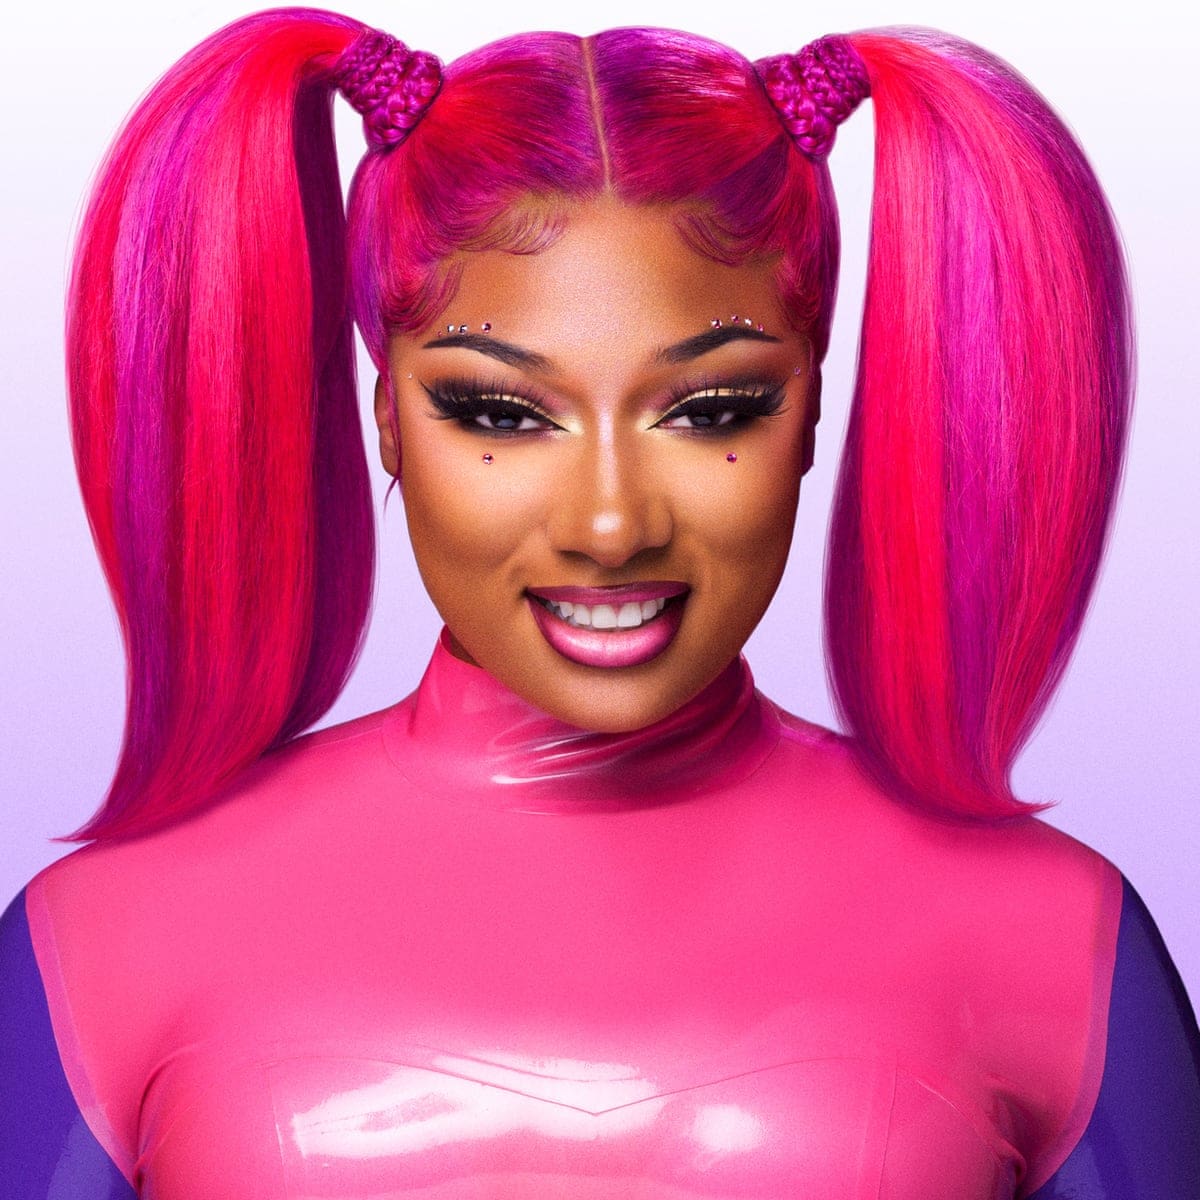 Megan Thee Stallion Reveals Her Real Hair In This Video And Amazes Fans With Her Natural Beauty